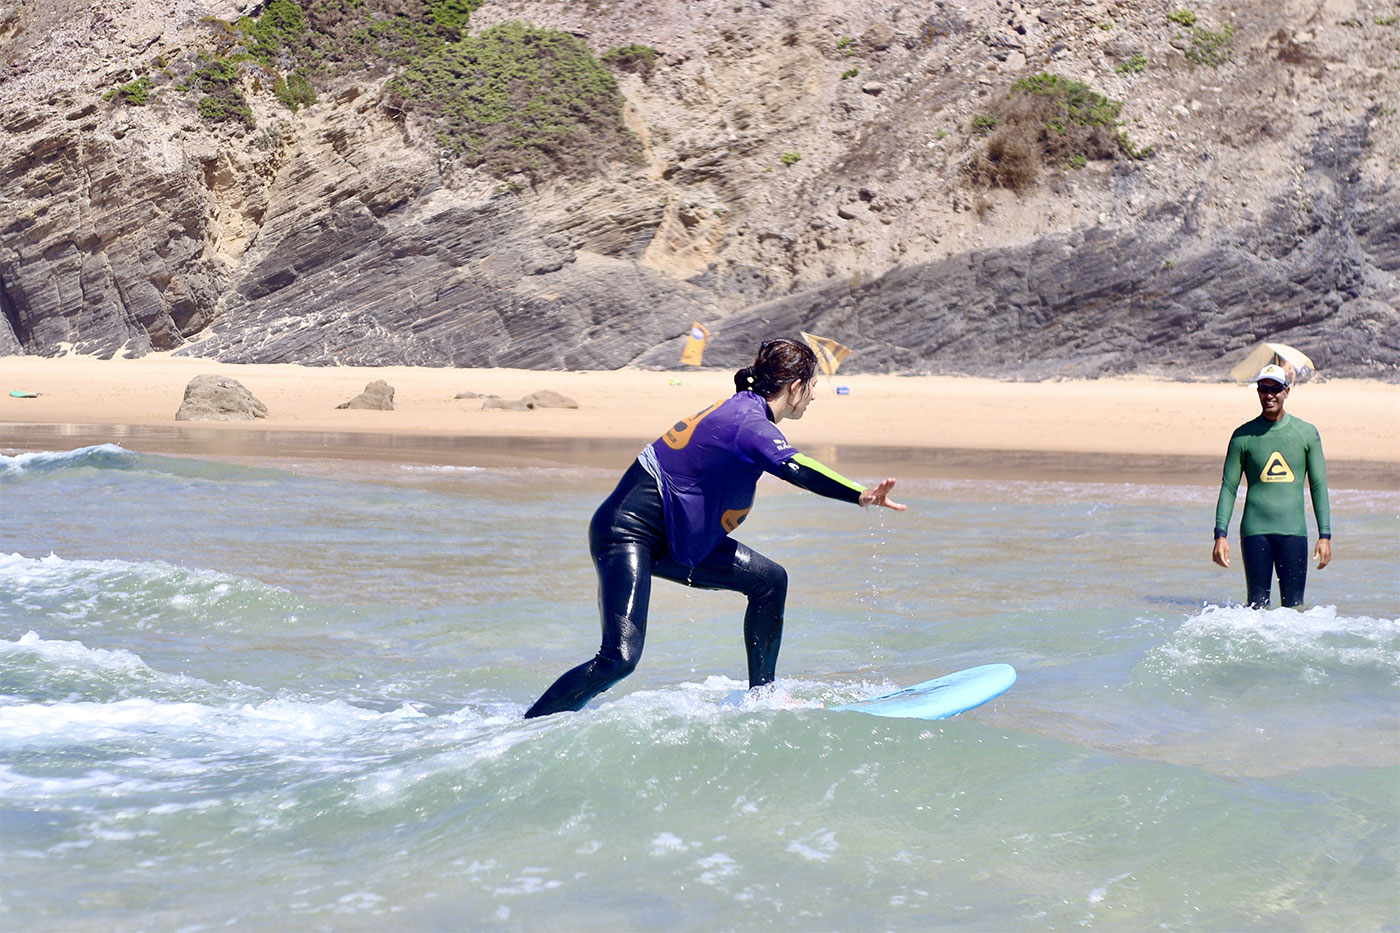 The second part of the surf lesson at amado